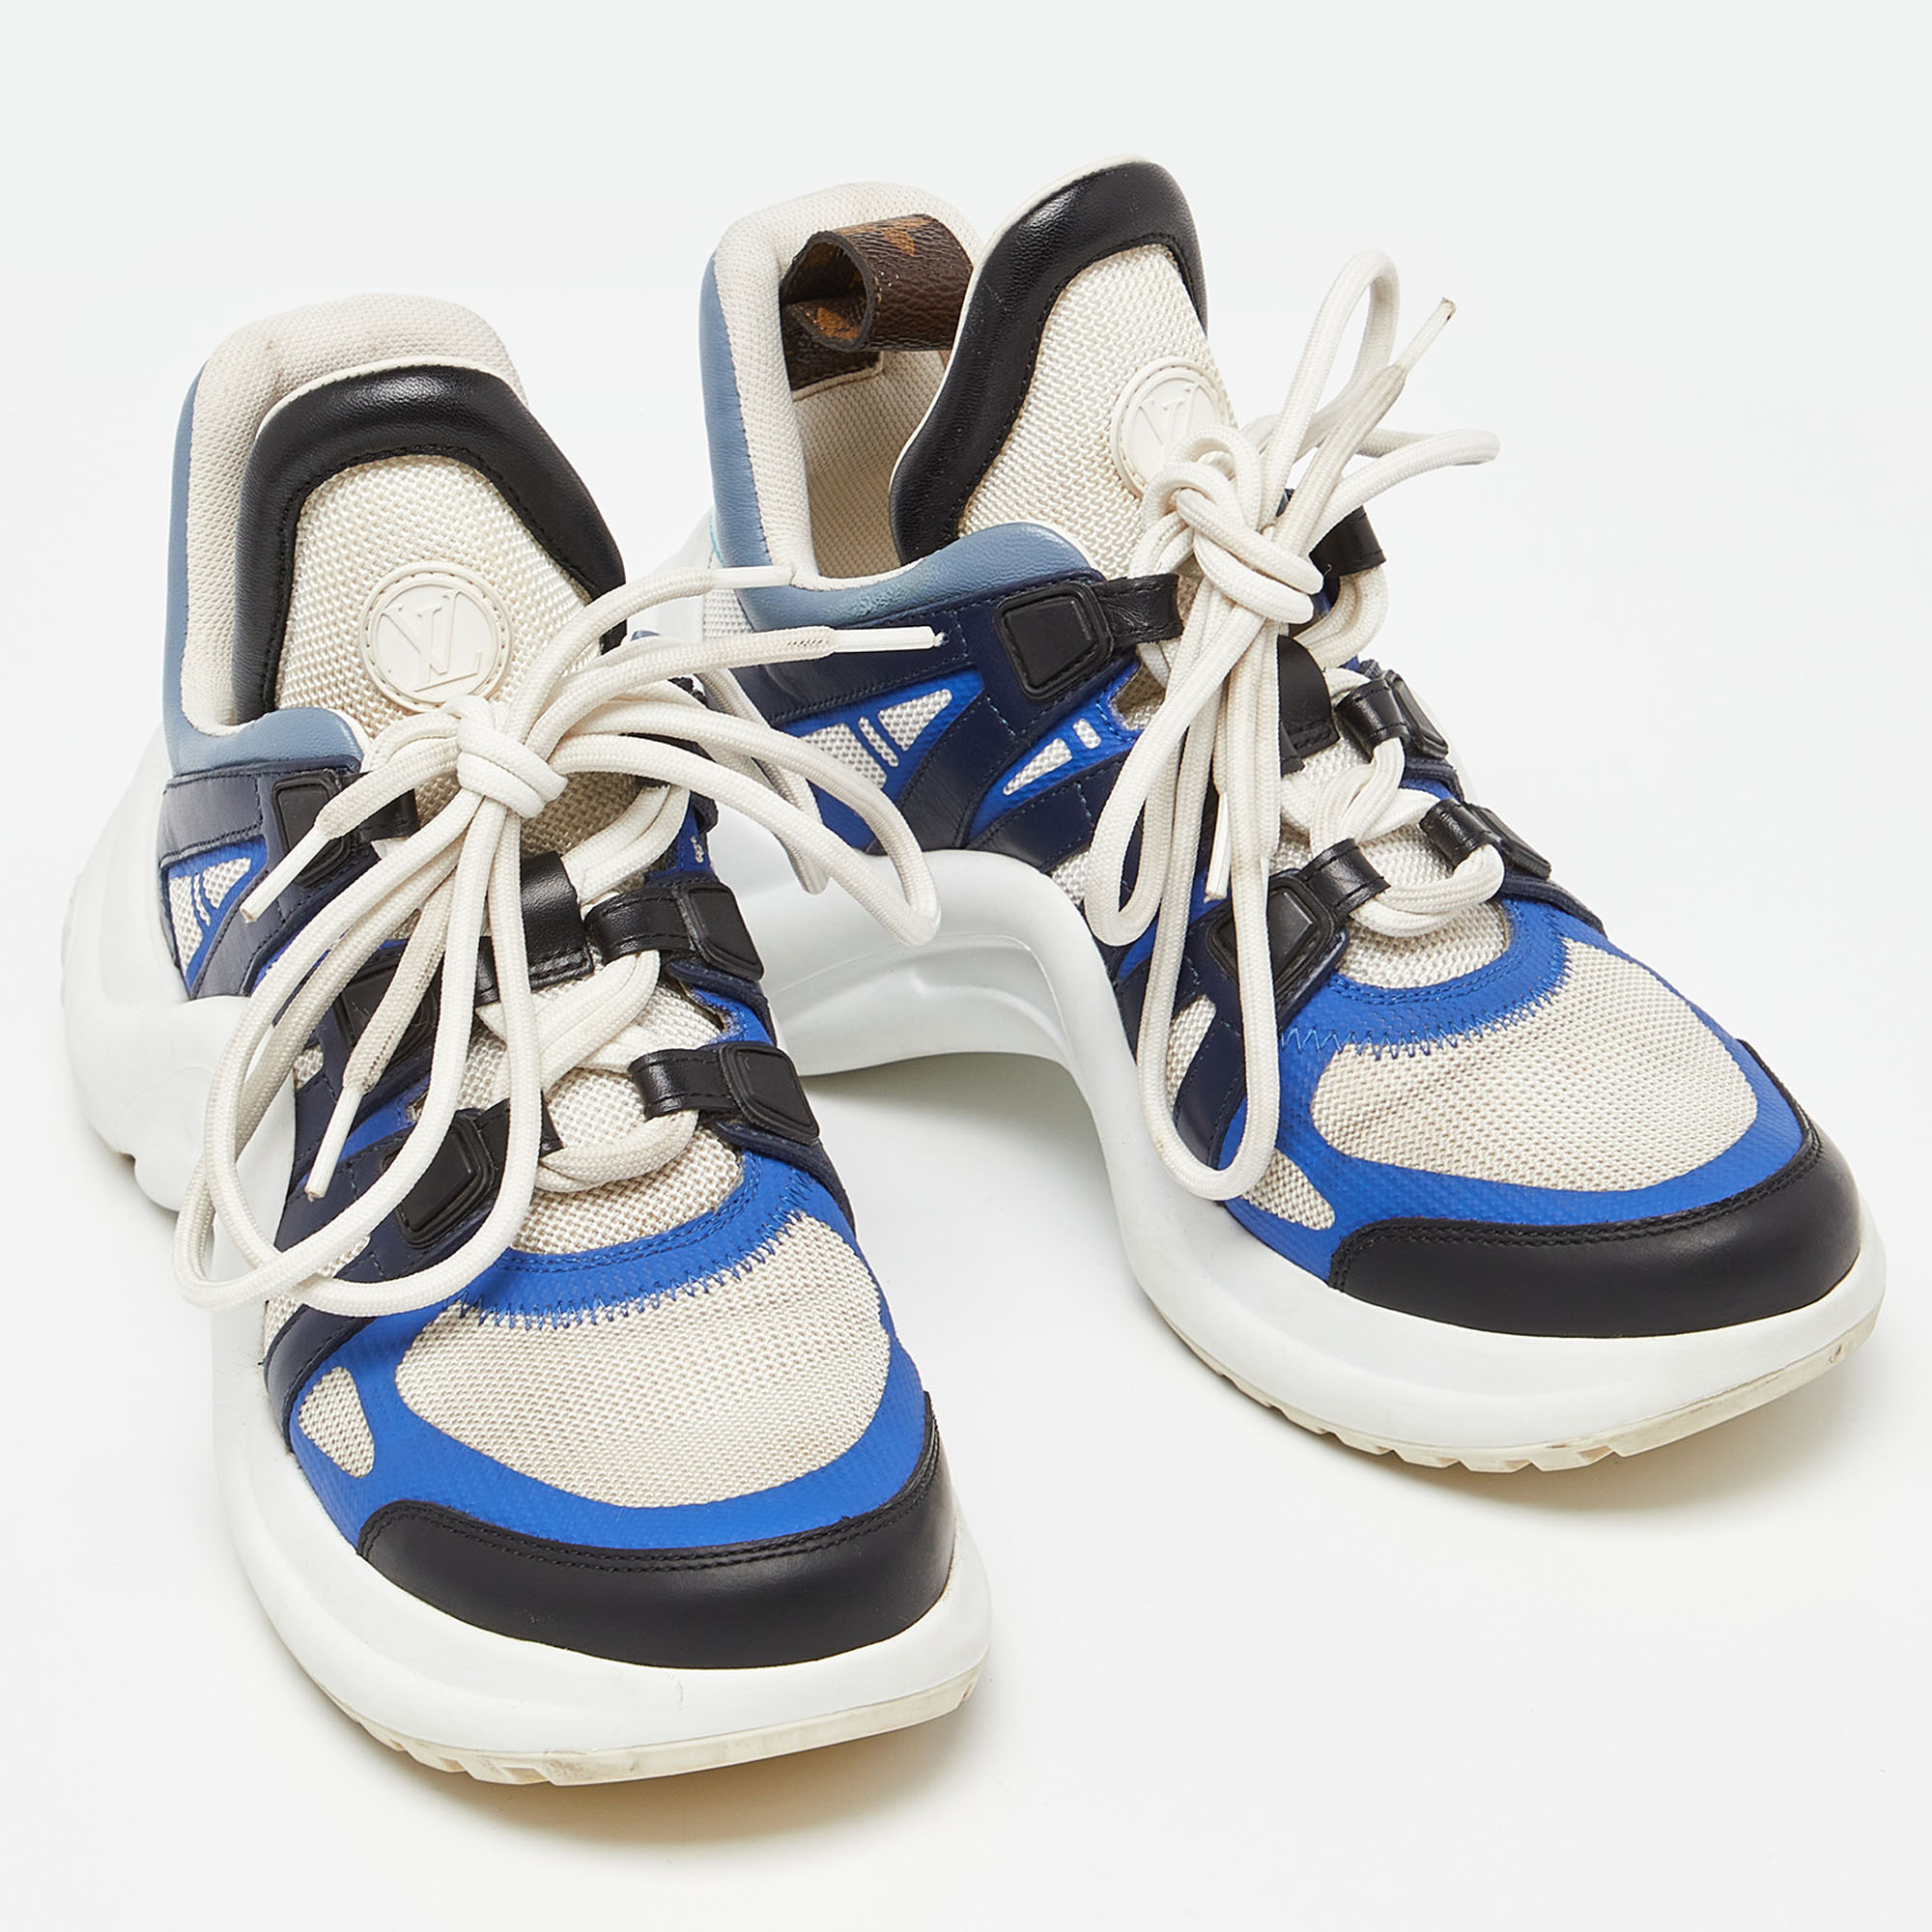 Louis Vuitton Tricolor Mesh And Leather Archlight Sneakers Size 36